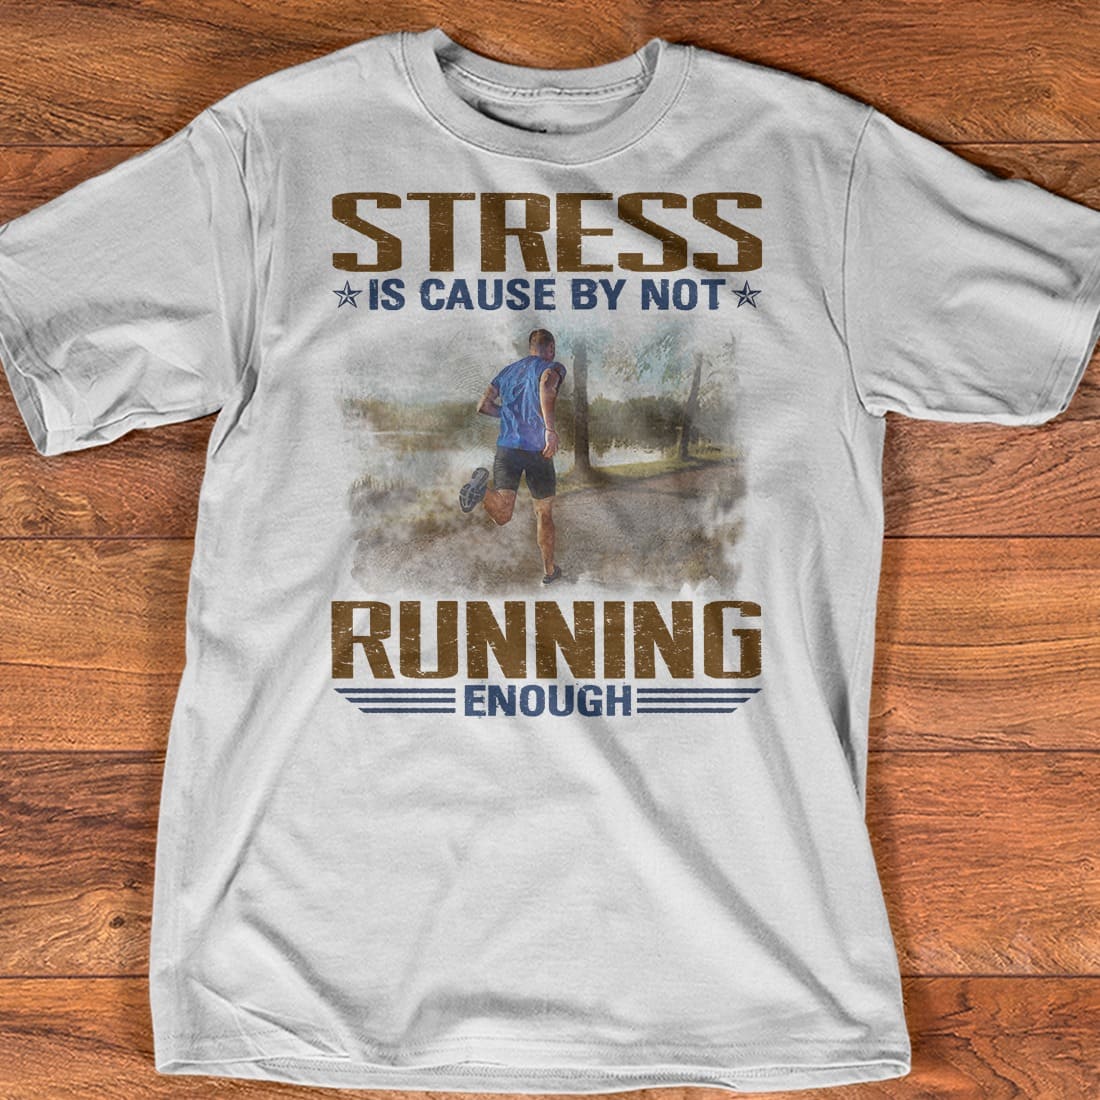 Running Man - Stress is cause by not running enough